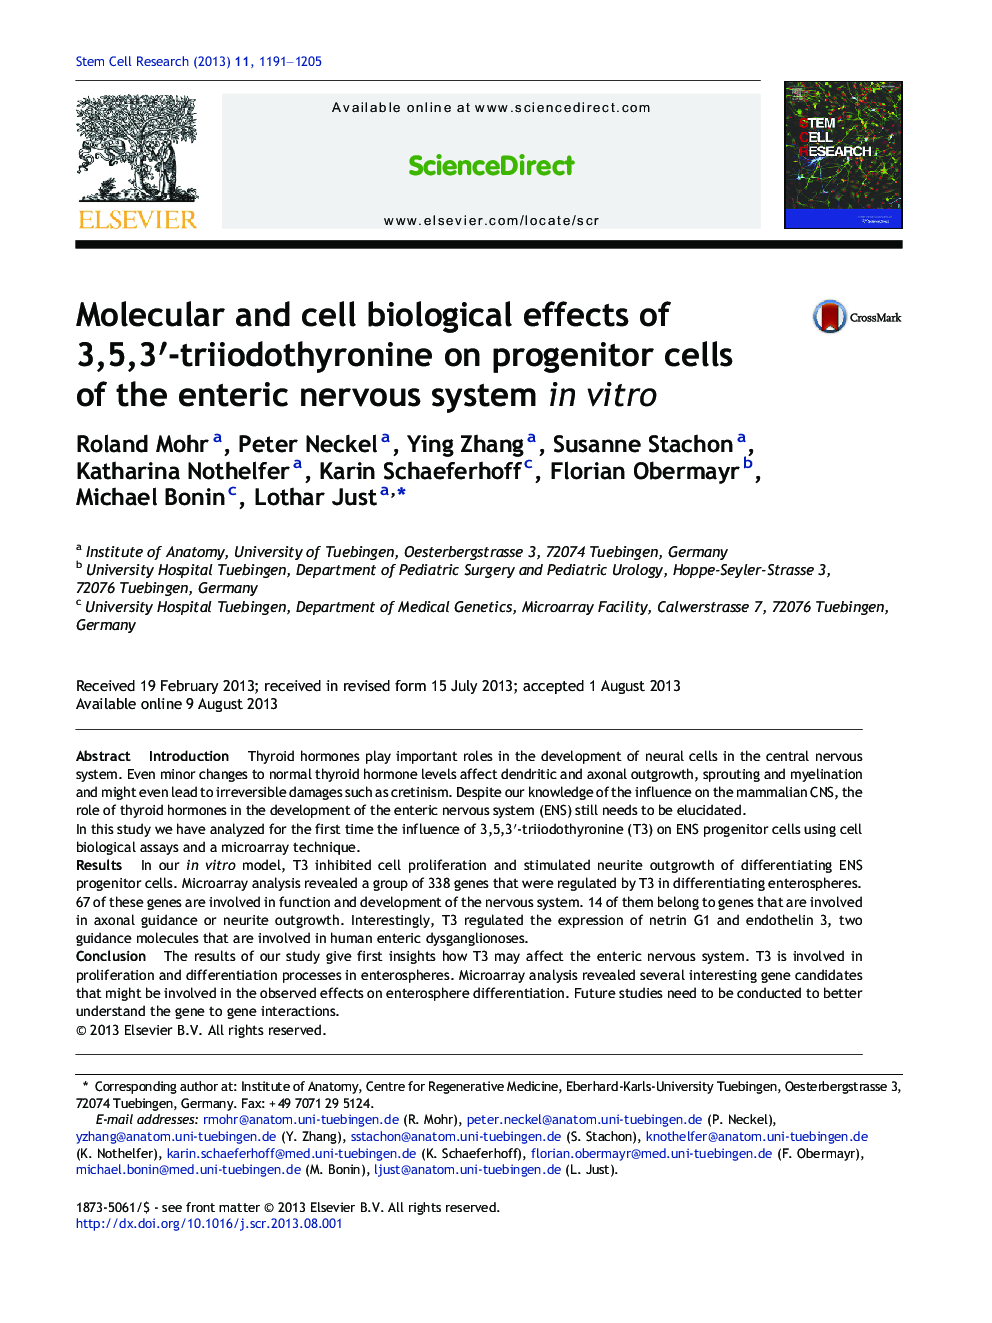 Molecular and cell biological effects of 3,5,3â²-triiodothyronine on progenitor cells of the enteric nervous system in vitro